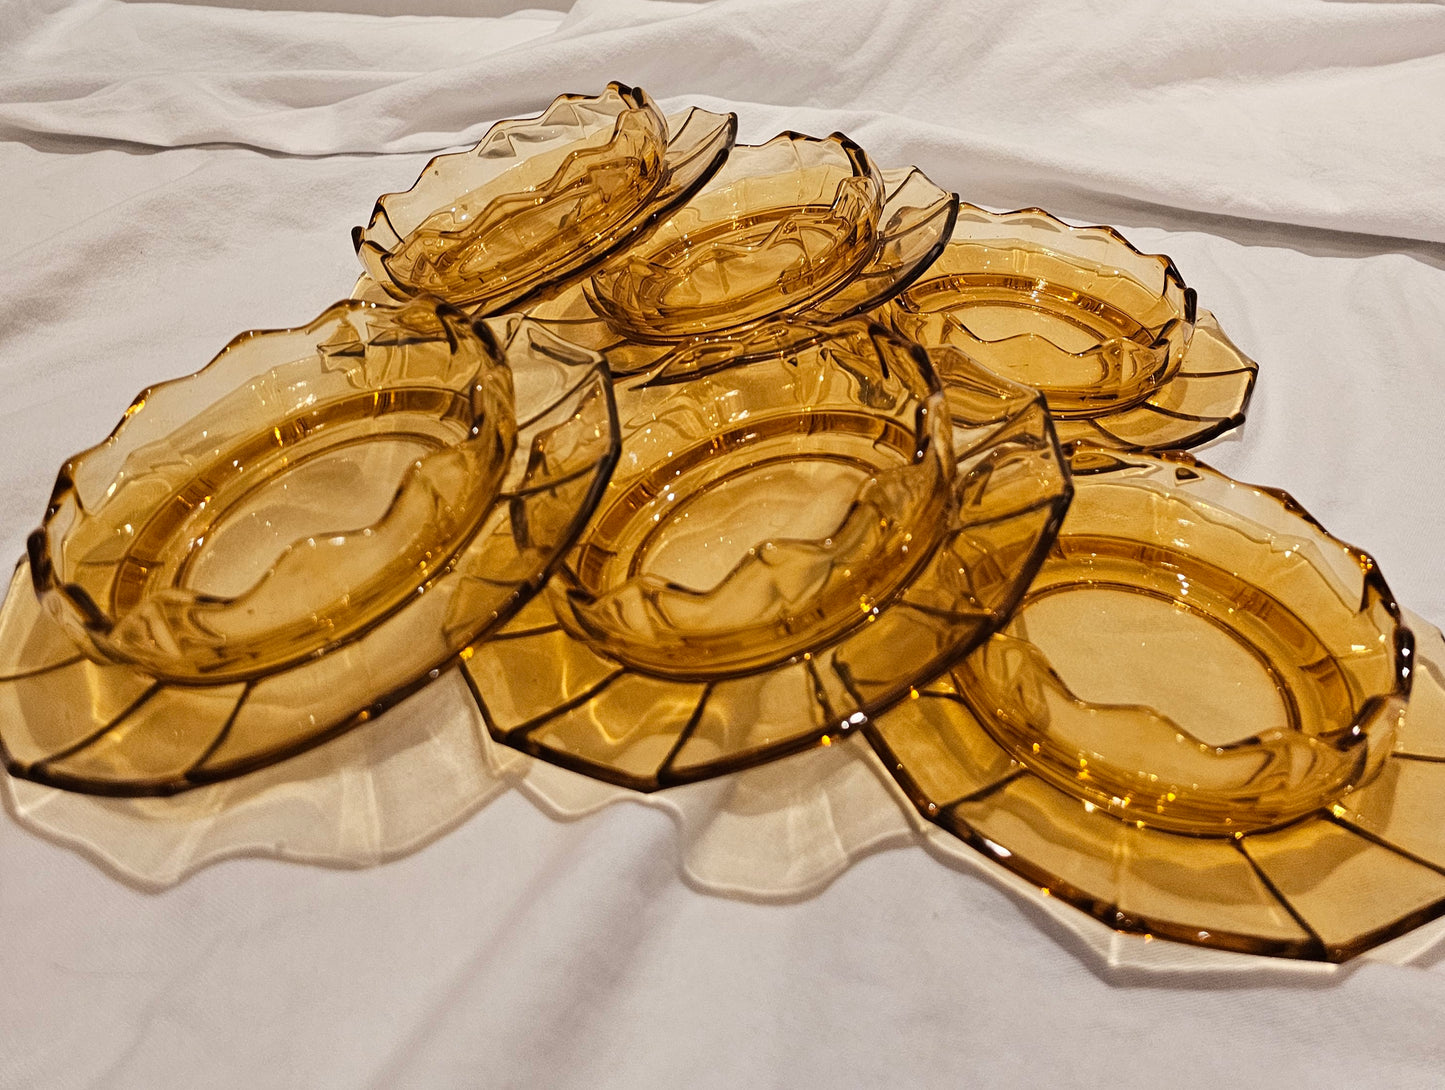 AMBER GLASS ENTREE DISHES